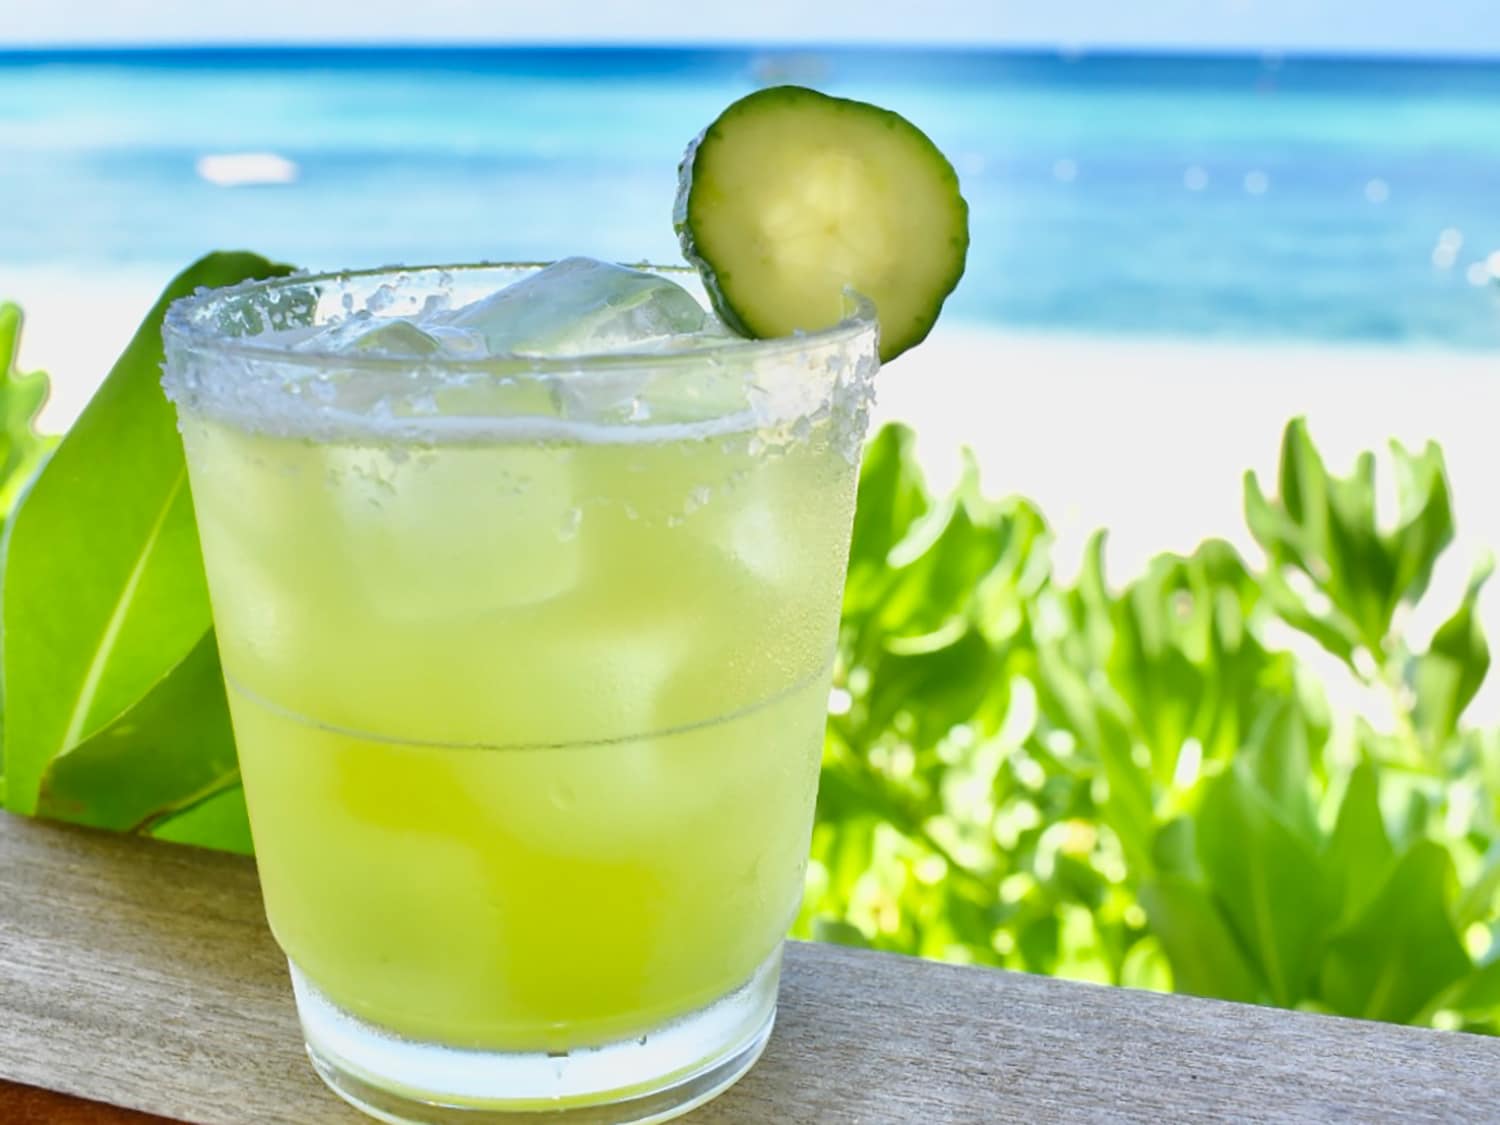 The Homegrown Margarita from Kimpton Seafire Resort + Spa in Grand Cayman, the Cayman Islands.